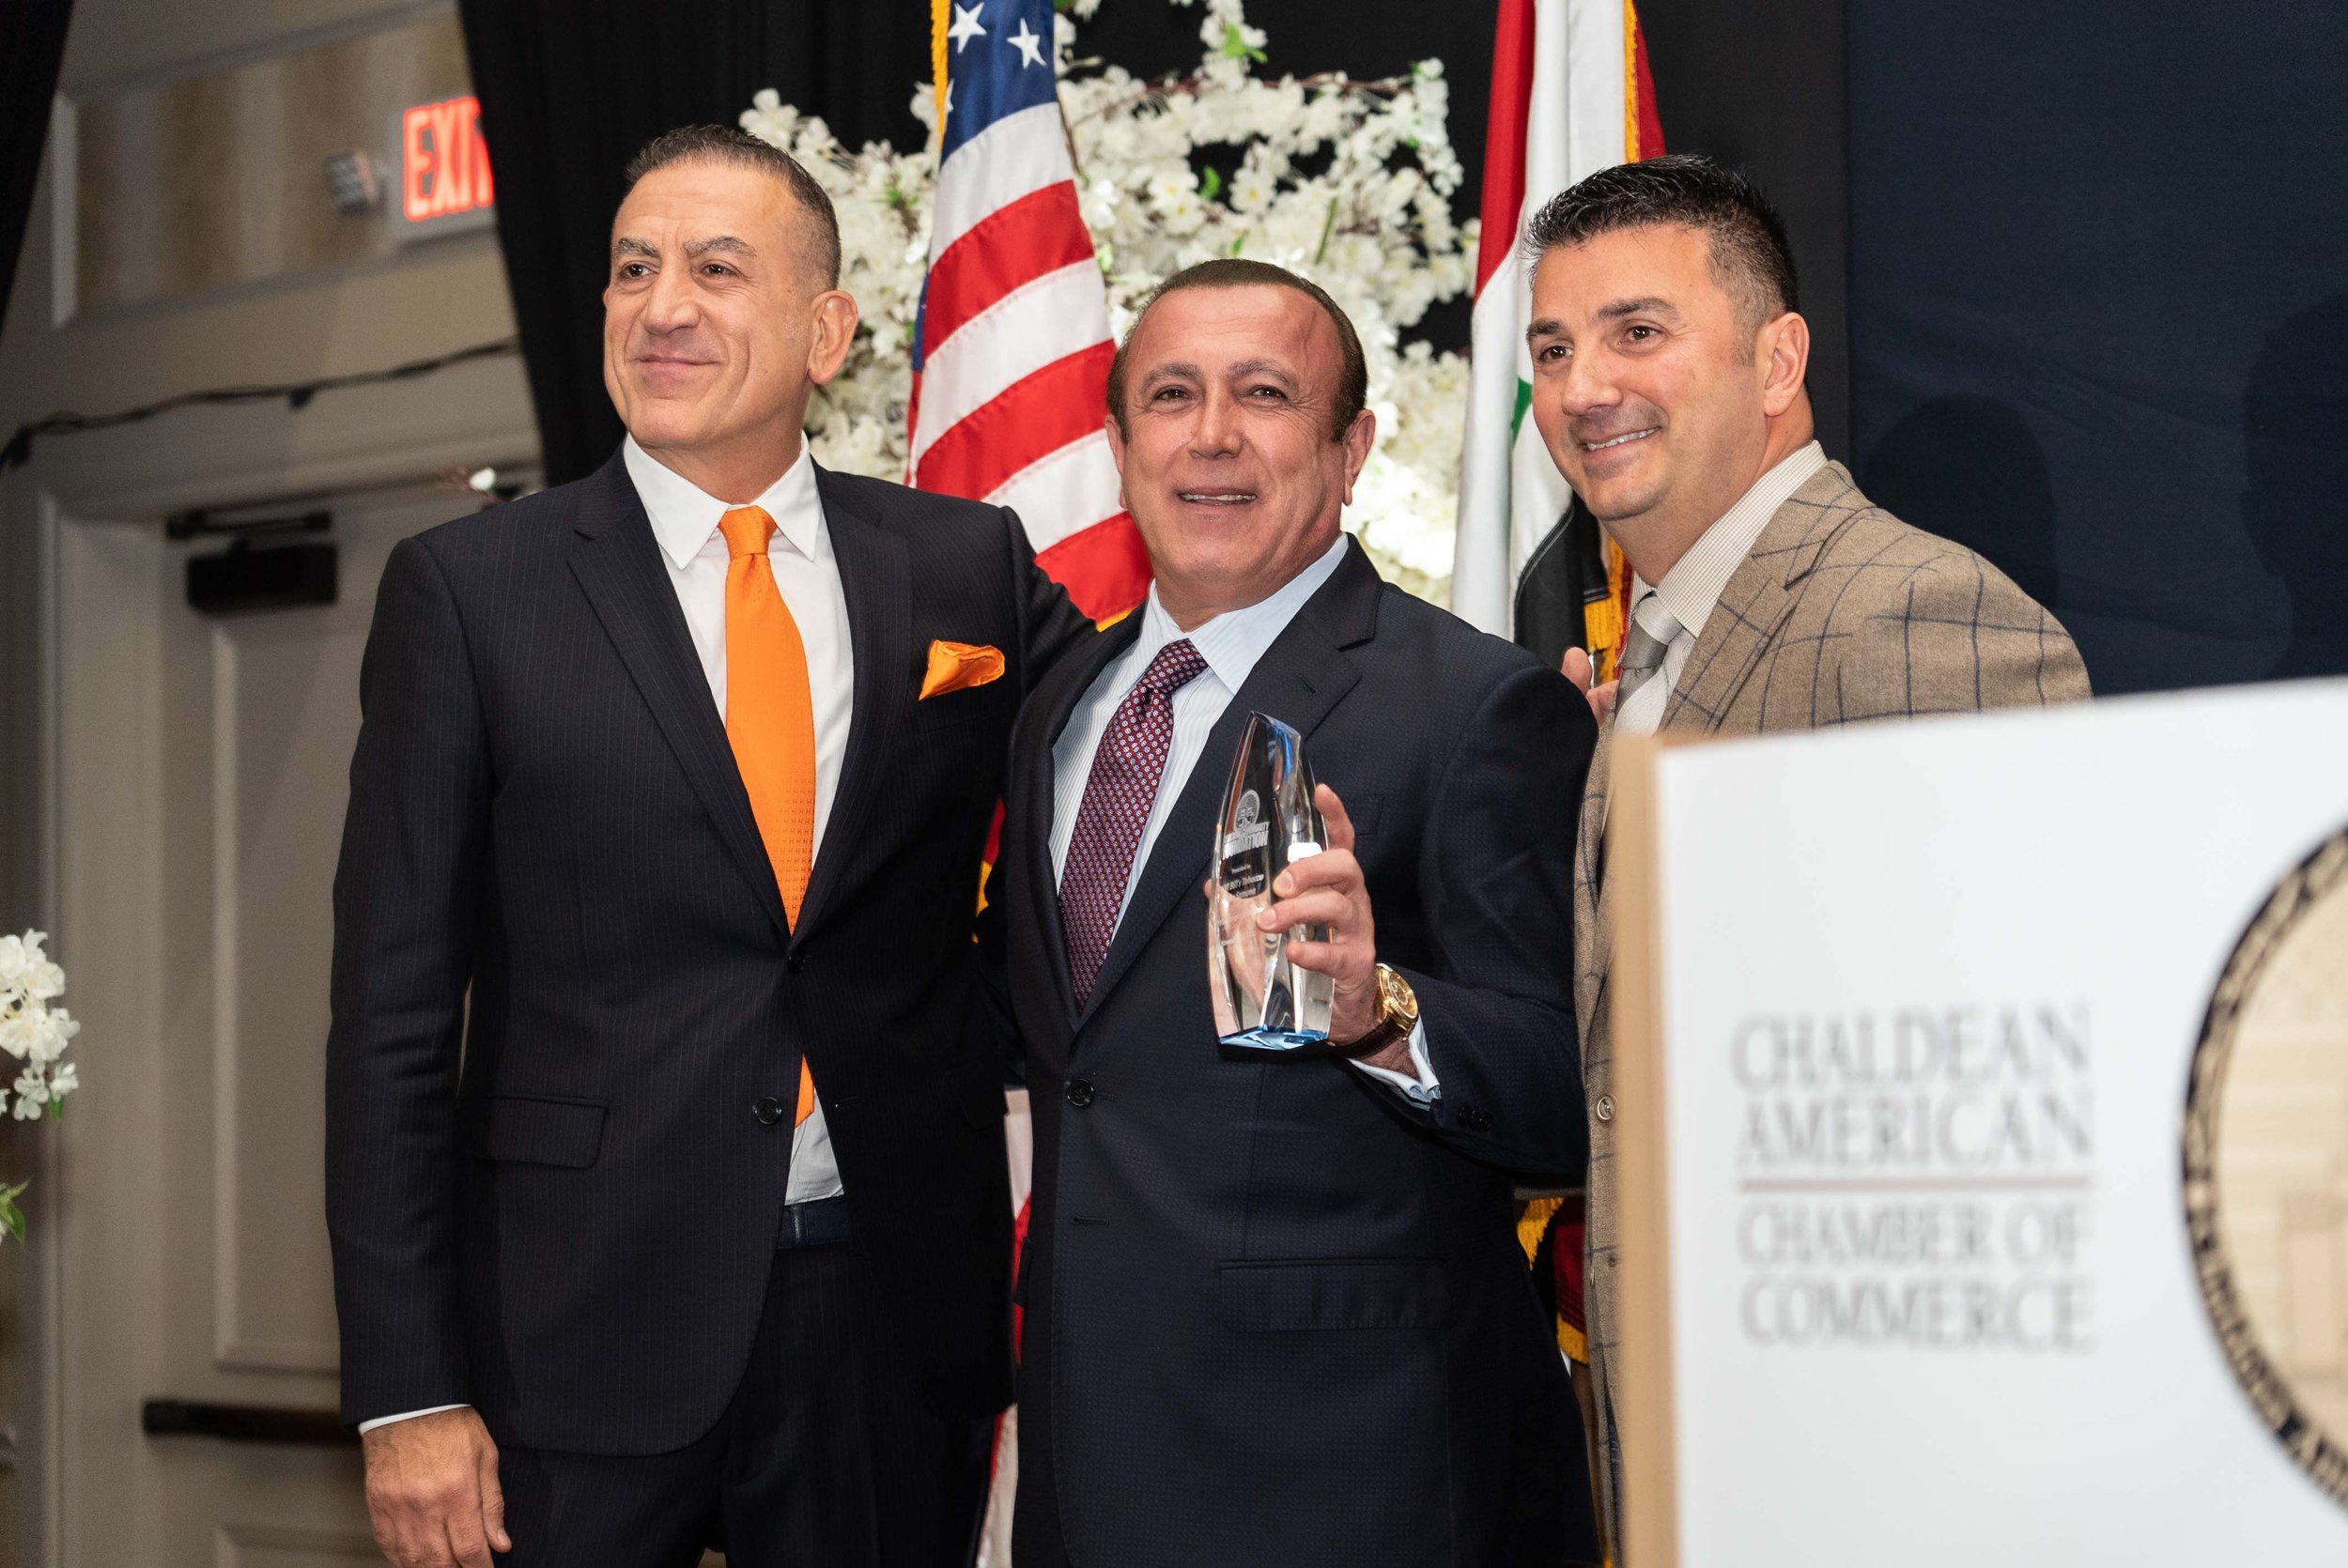  Wild Bill’s CEO, Mike Samona, received the Philanthropist of the Year award. From left to right: Saber Ammori, Mike Samona, and Martin Manna. 